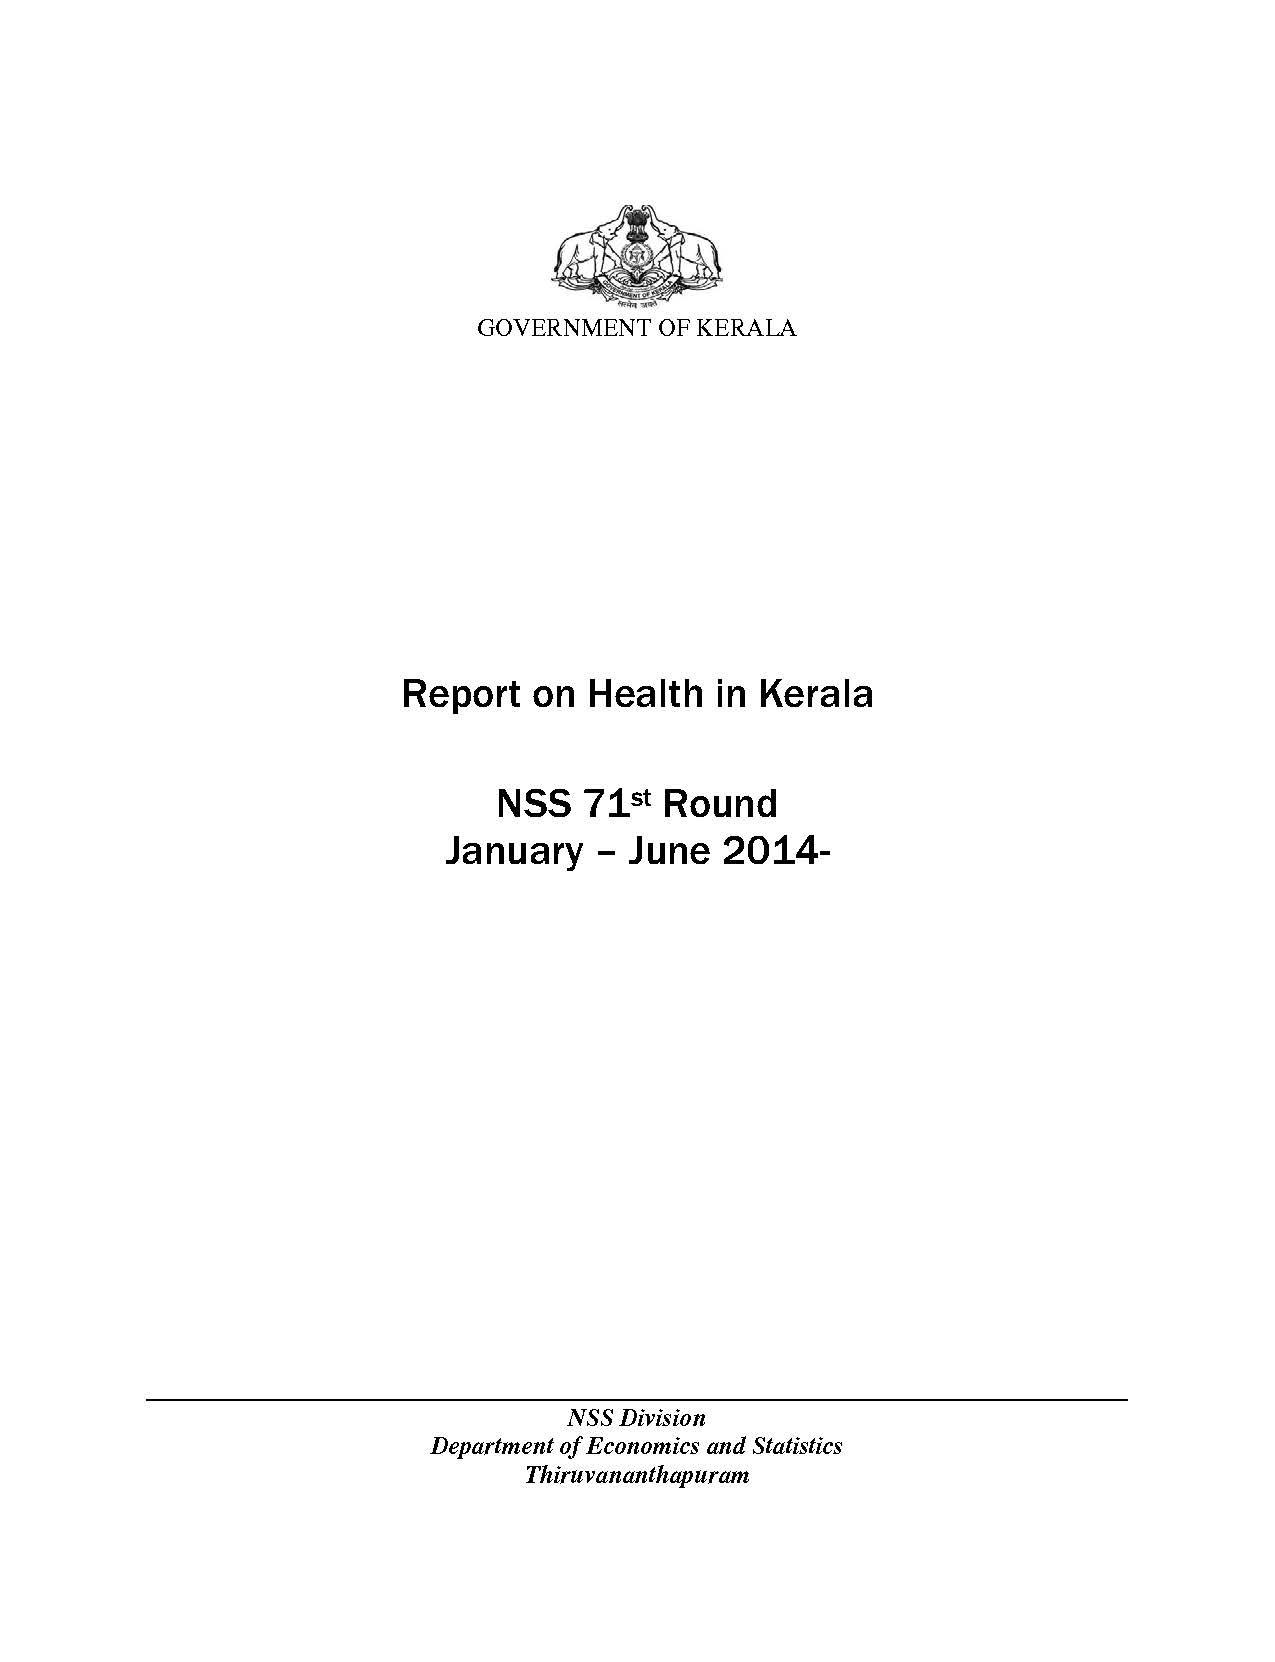 NSS 71st round - Report on Health in Kerala